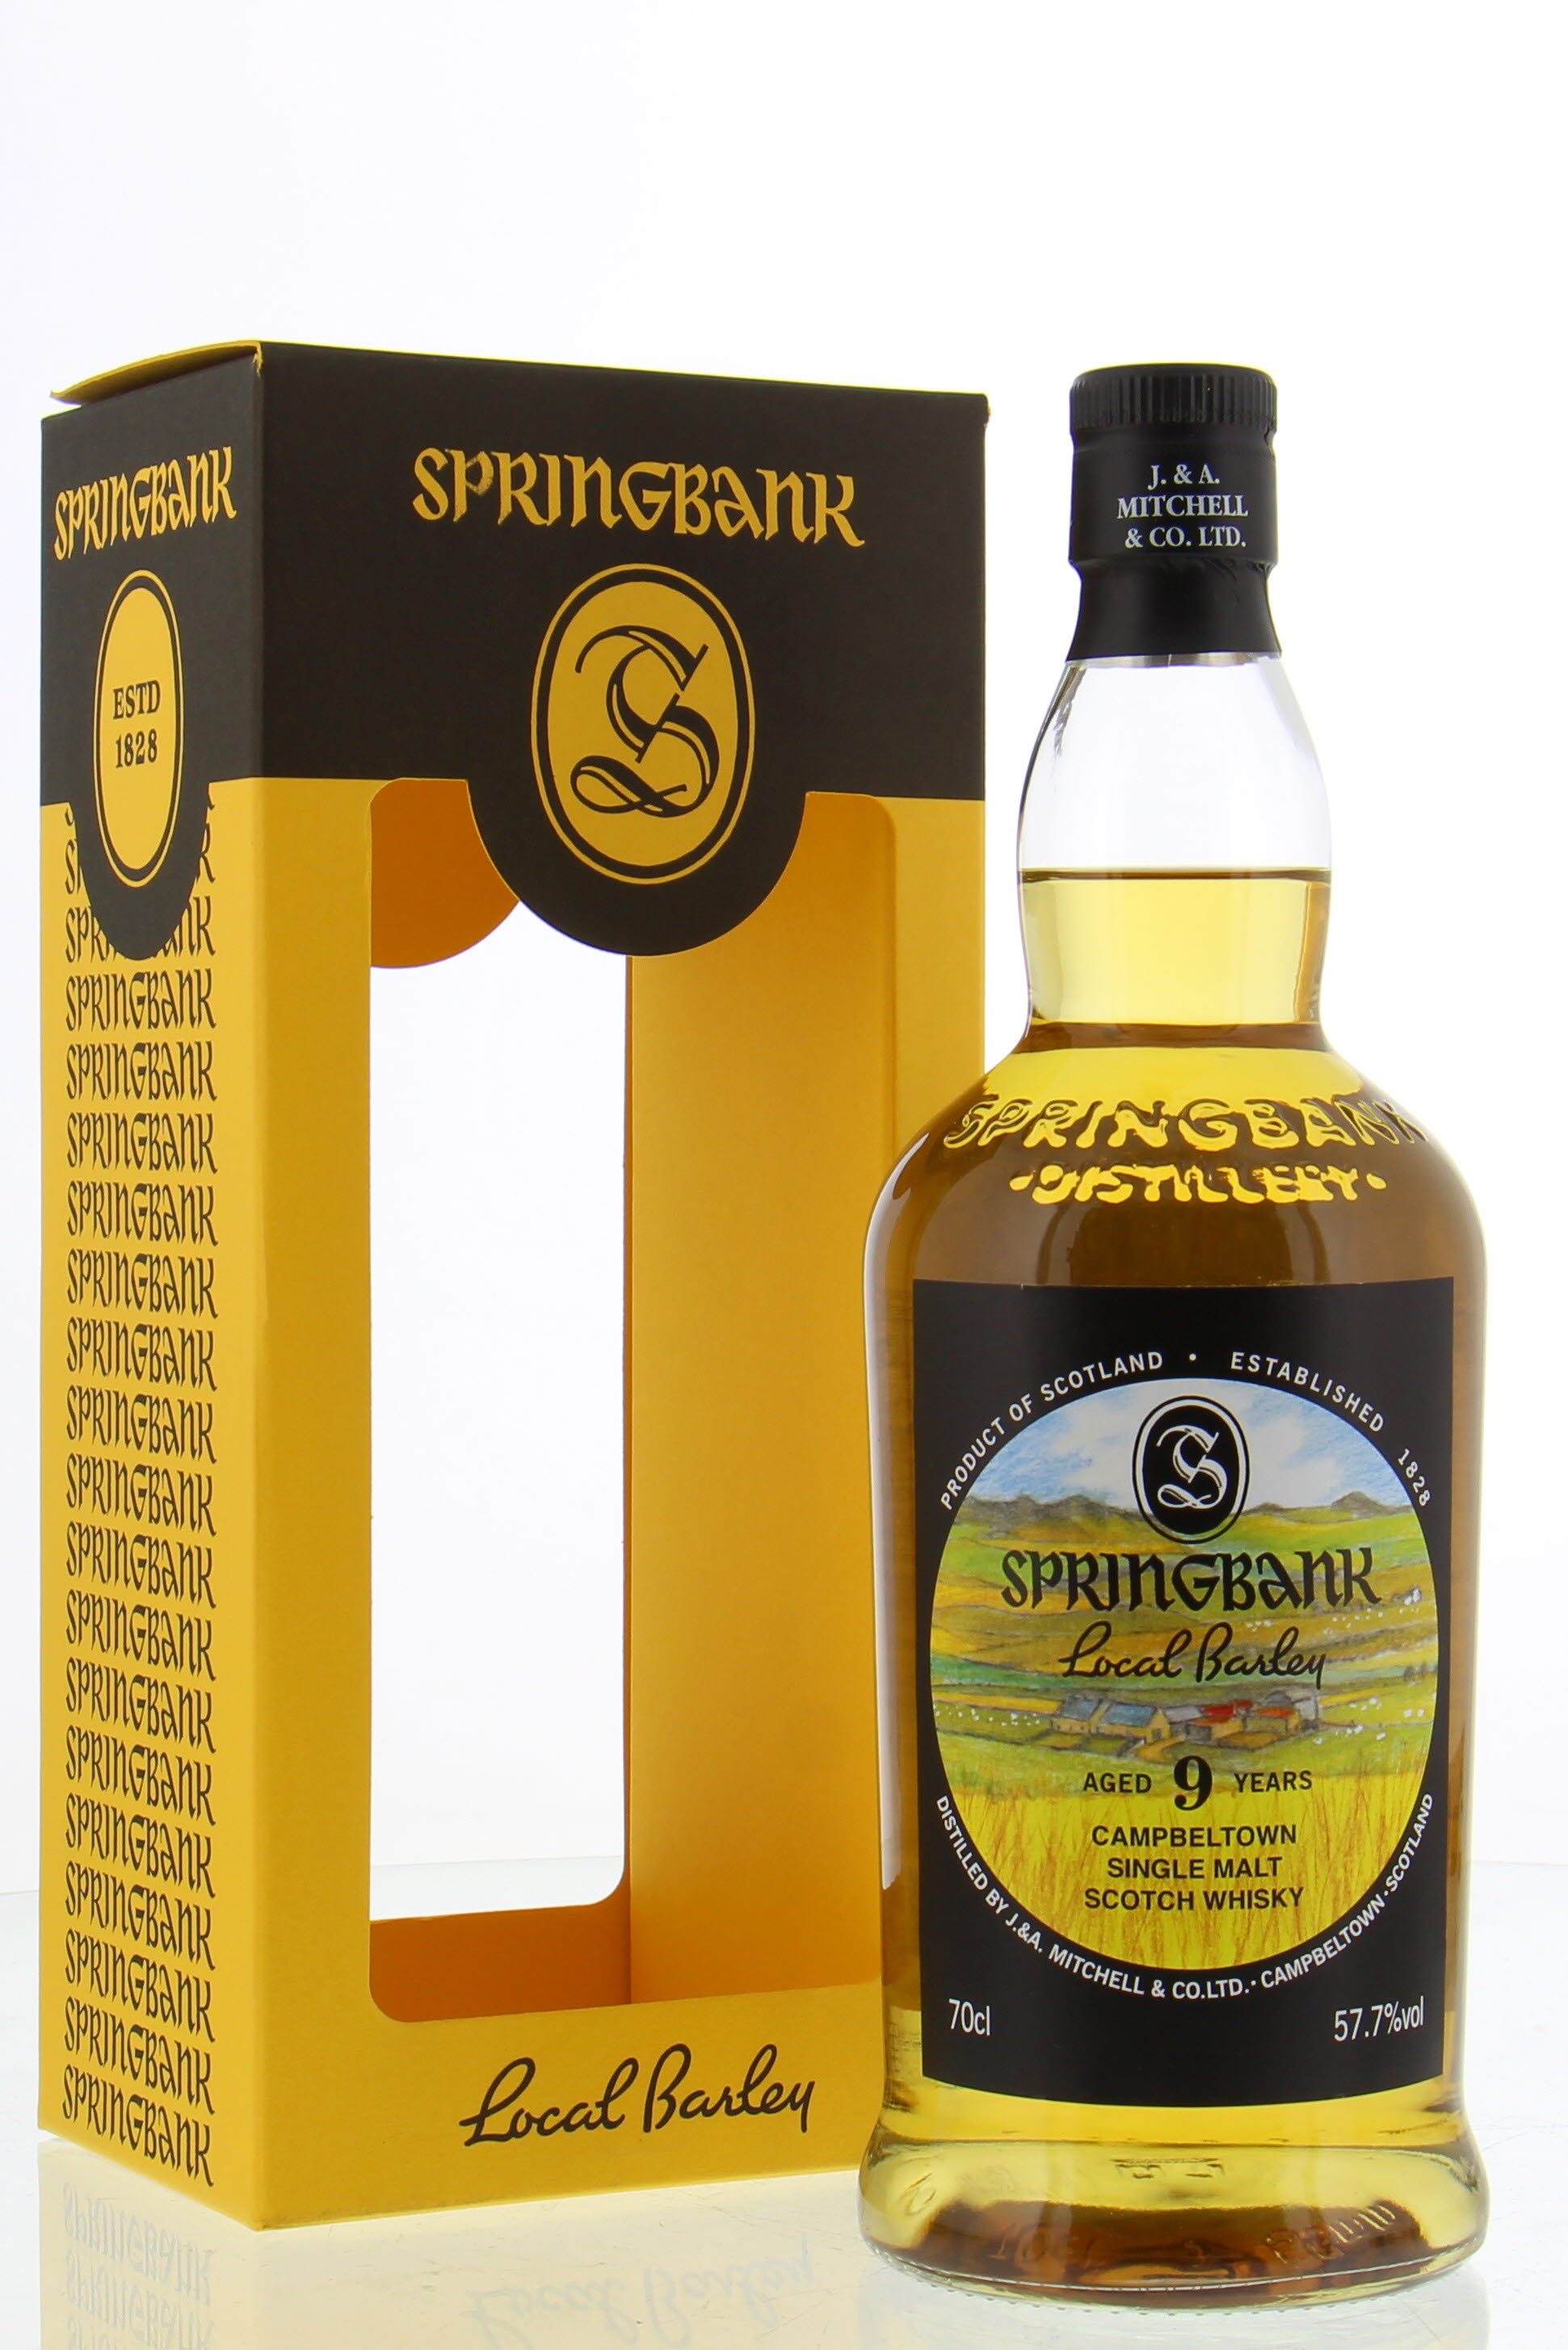 Springbank - 9 Years Old Local Barley 57.7% 2007 In Original Container